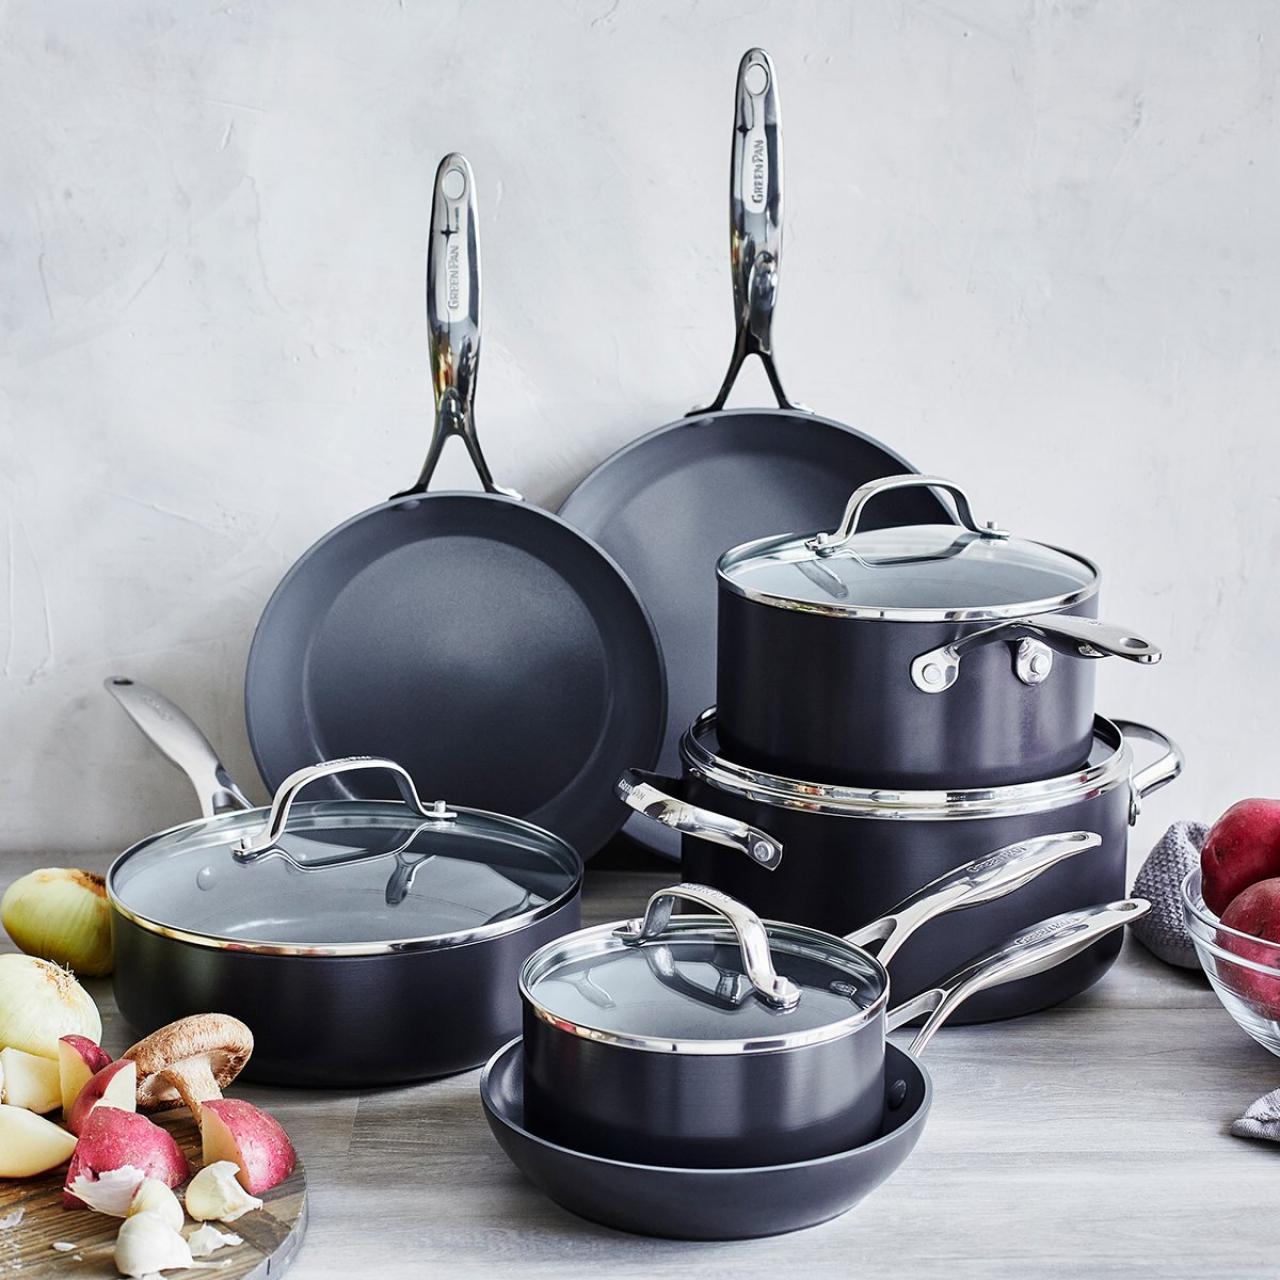 Prime Day Kitchen Deal on Green Pan's Ceramic Nonstick Cookware Set